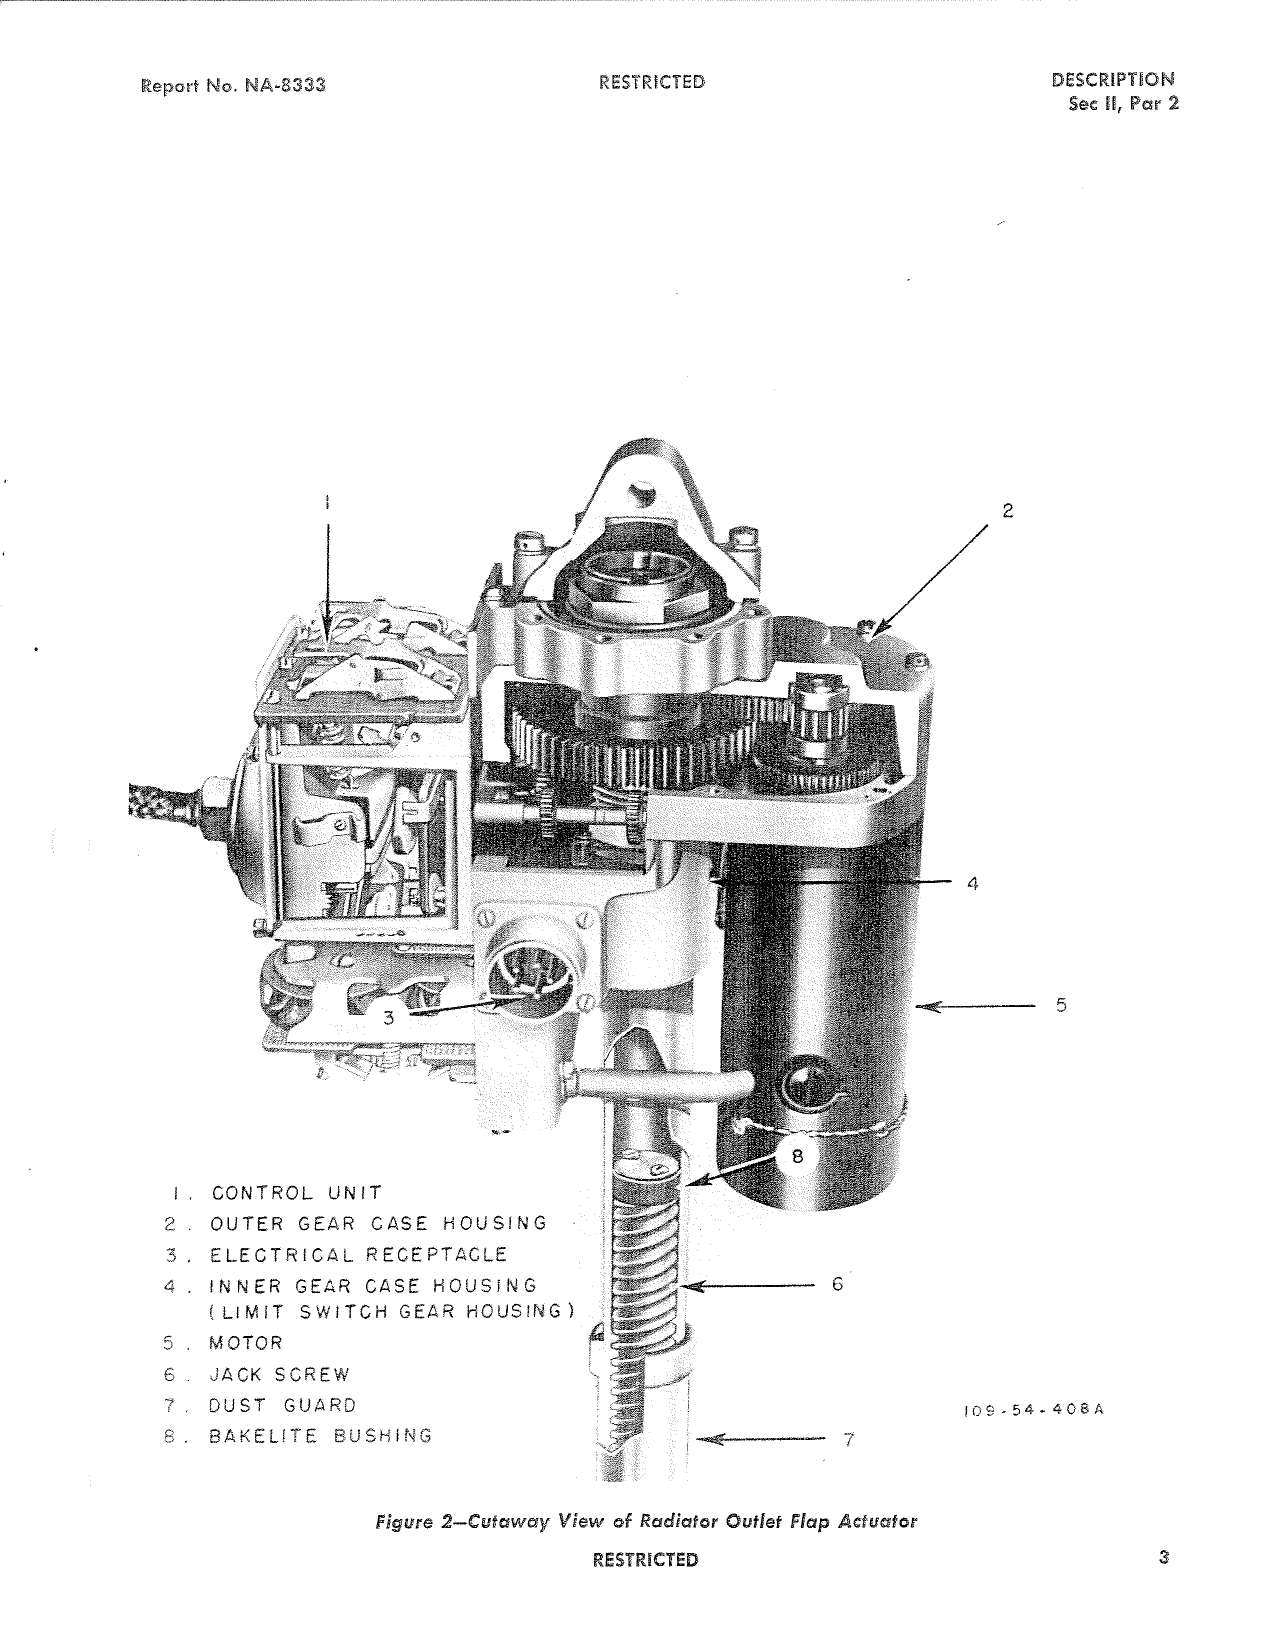 Sample page 6 from AirCorps Library document: Service Manual for Robertshaw Actuators Models R-4310 and R-4250